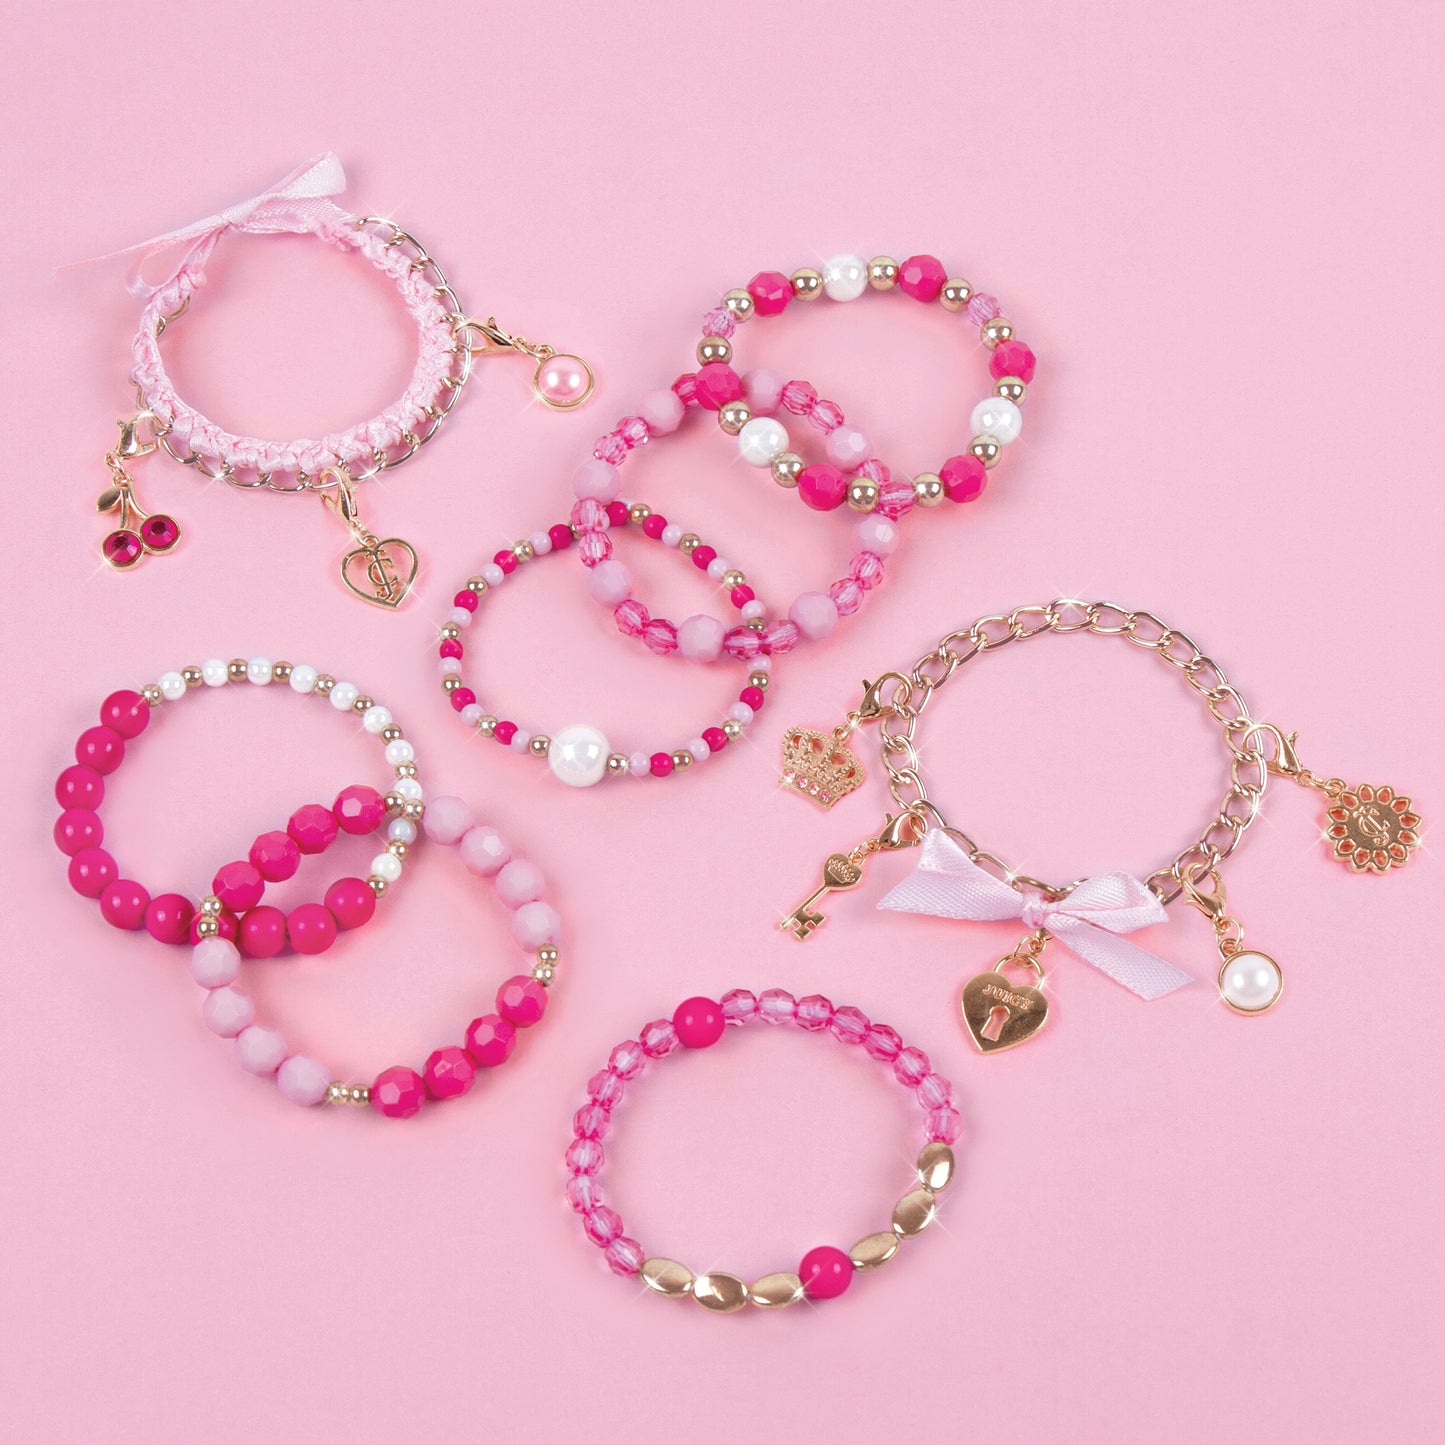 Juicy Couture™ Perfectly Pink Bracelets